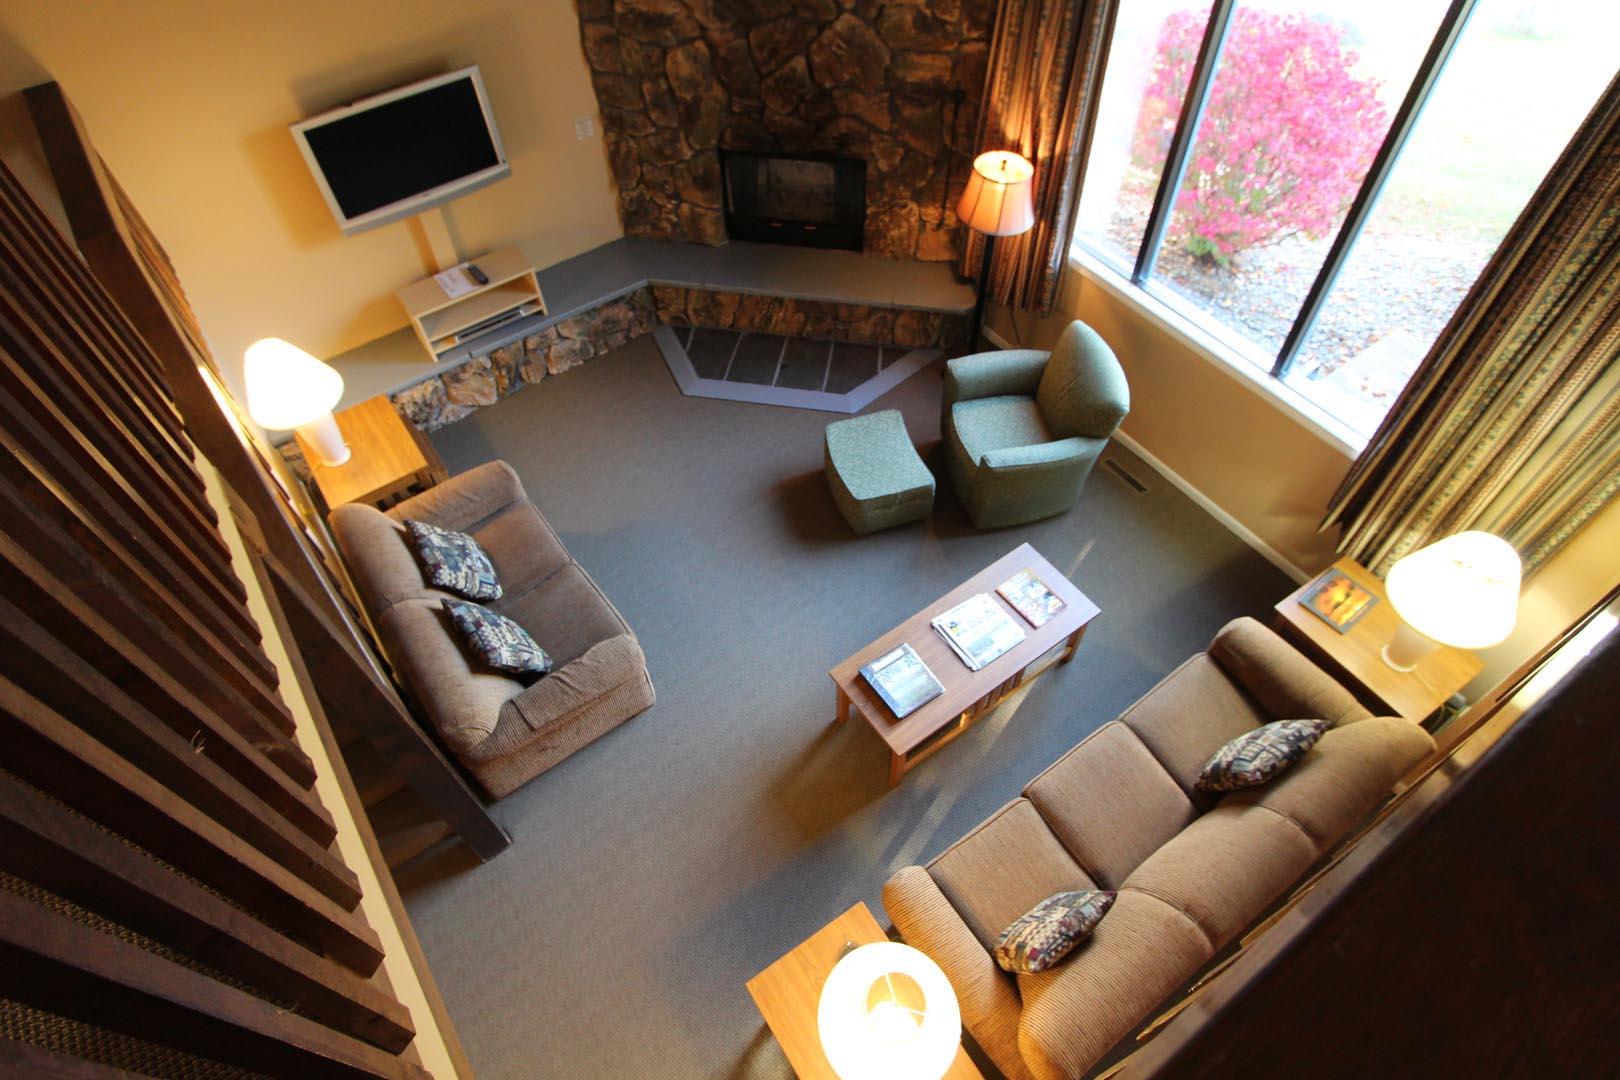 A spacious living room area at VRI's Lake Placid Club Lodges in New York.